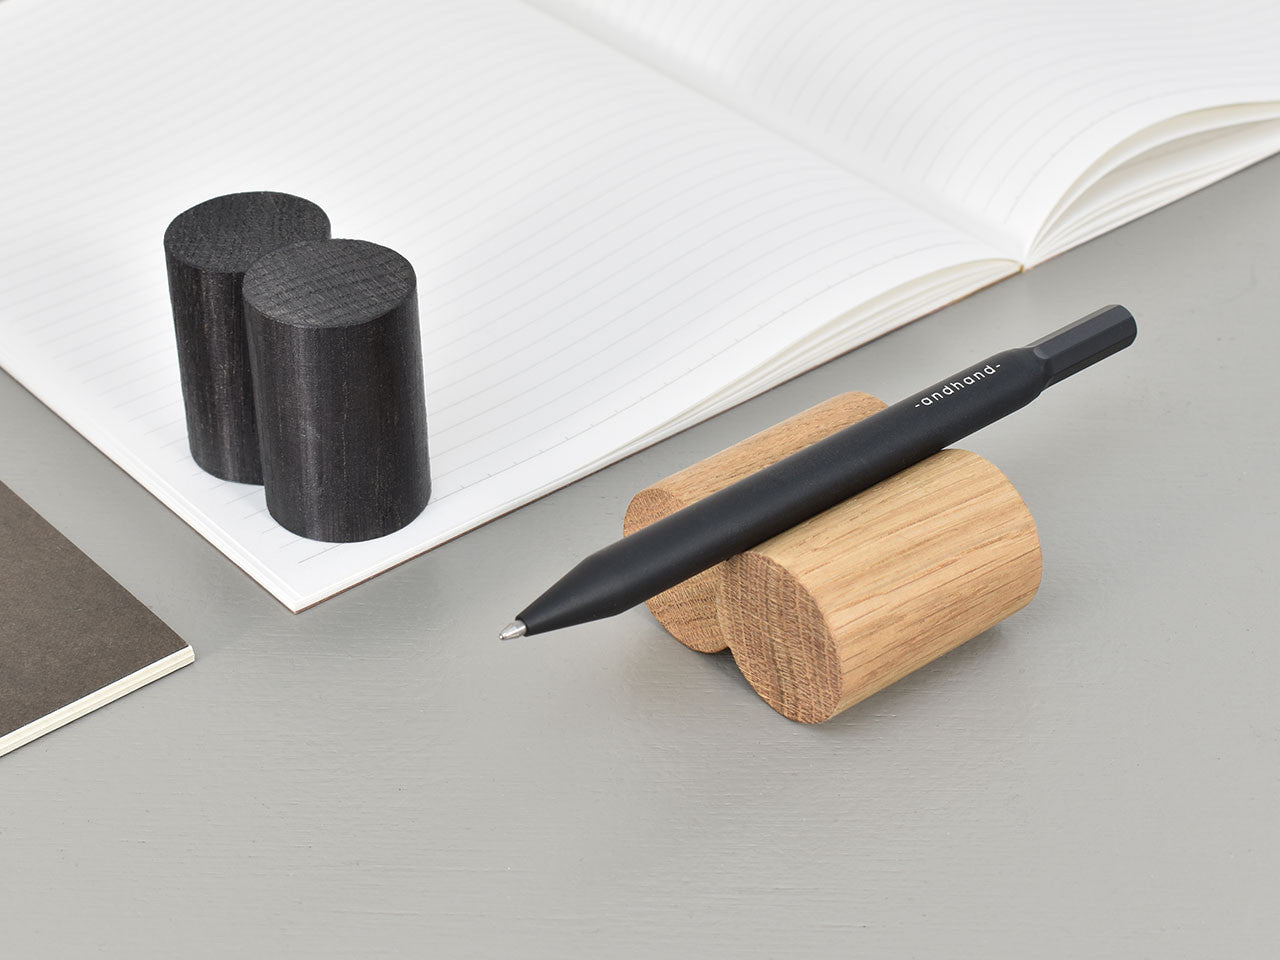 Oo pen rest, solid oak and black stained finish. Beautiful wood joinery.